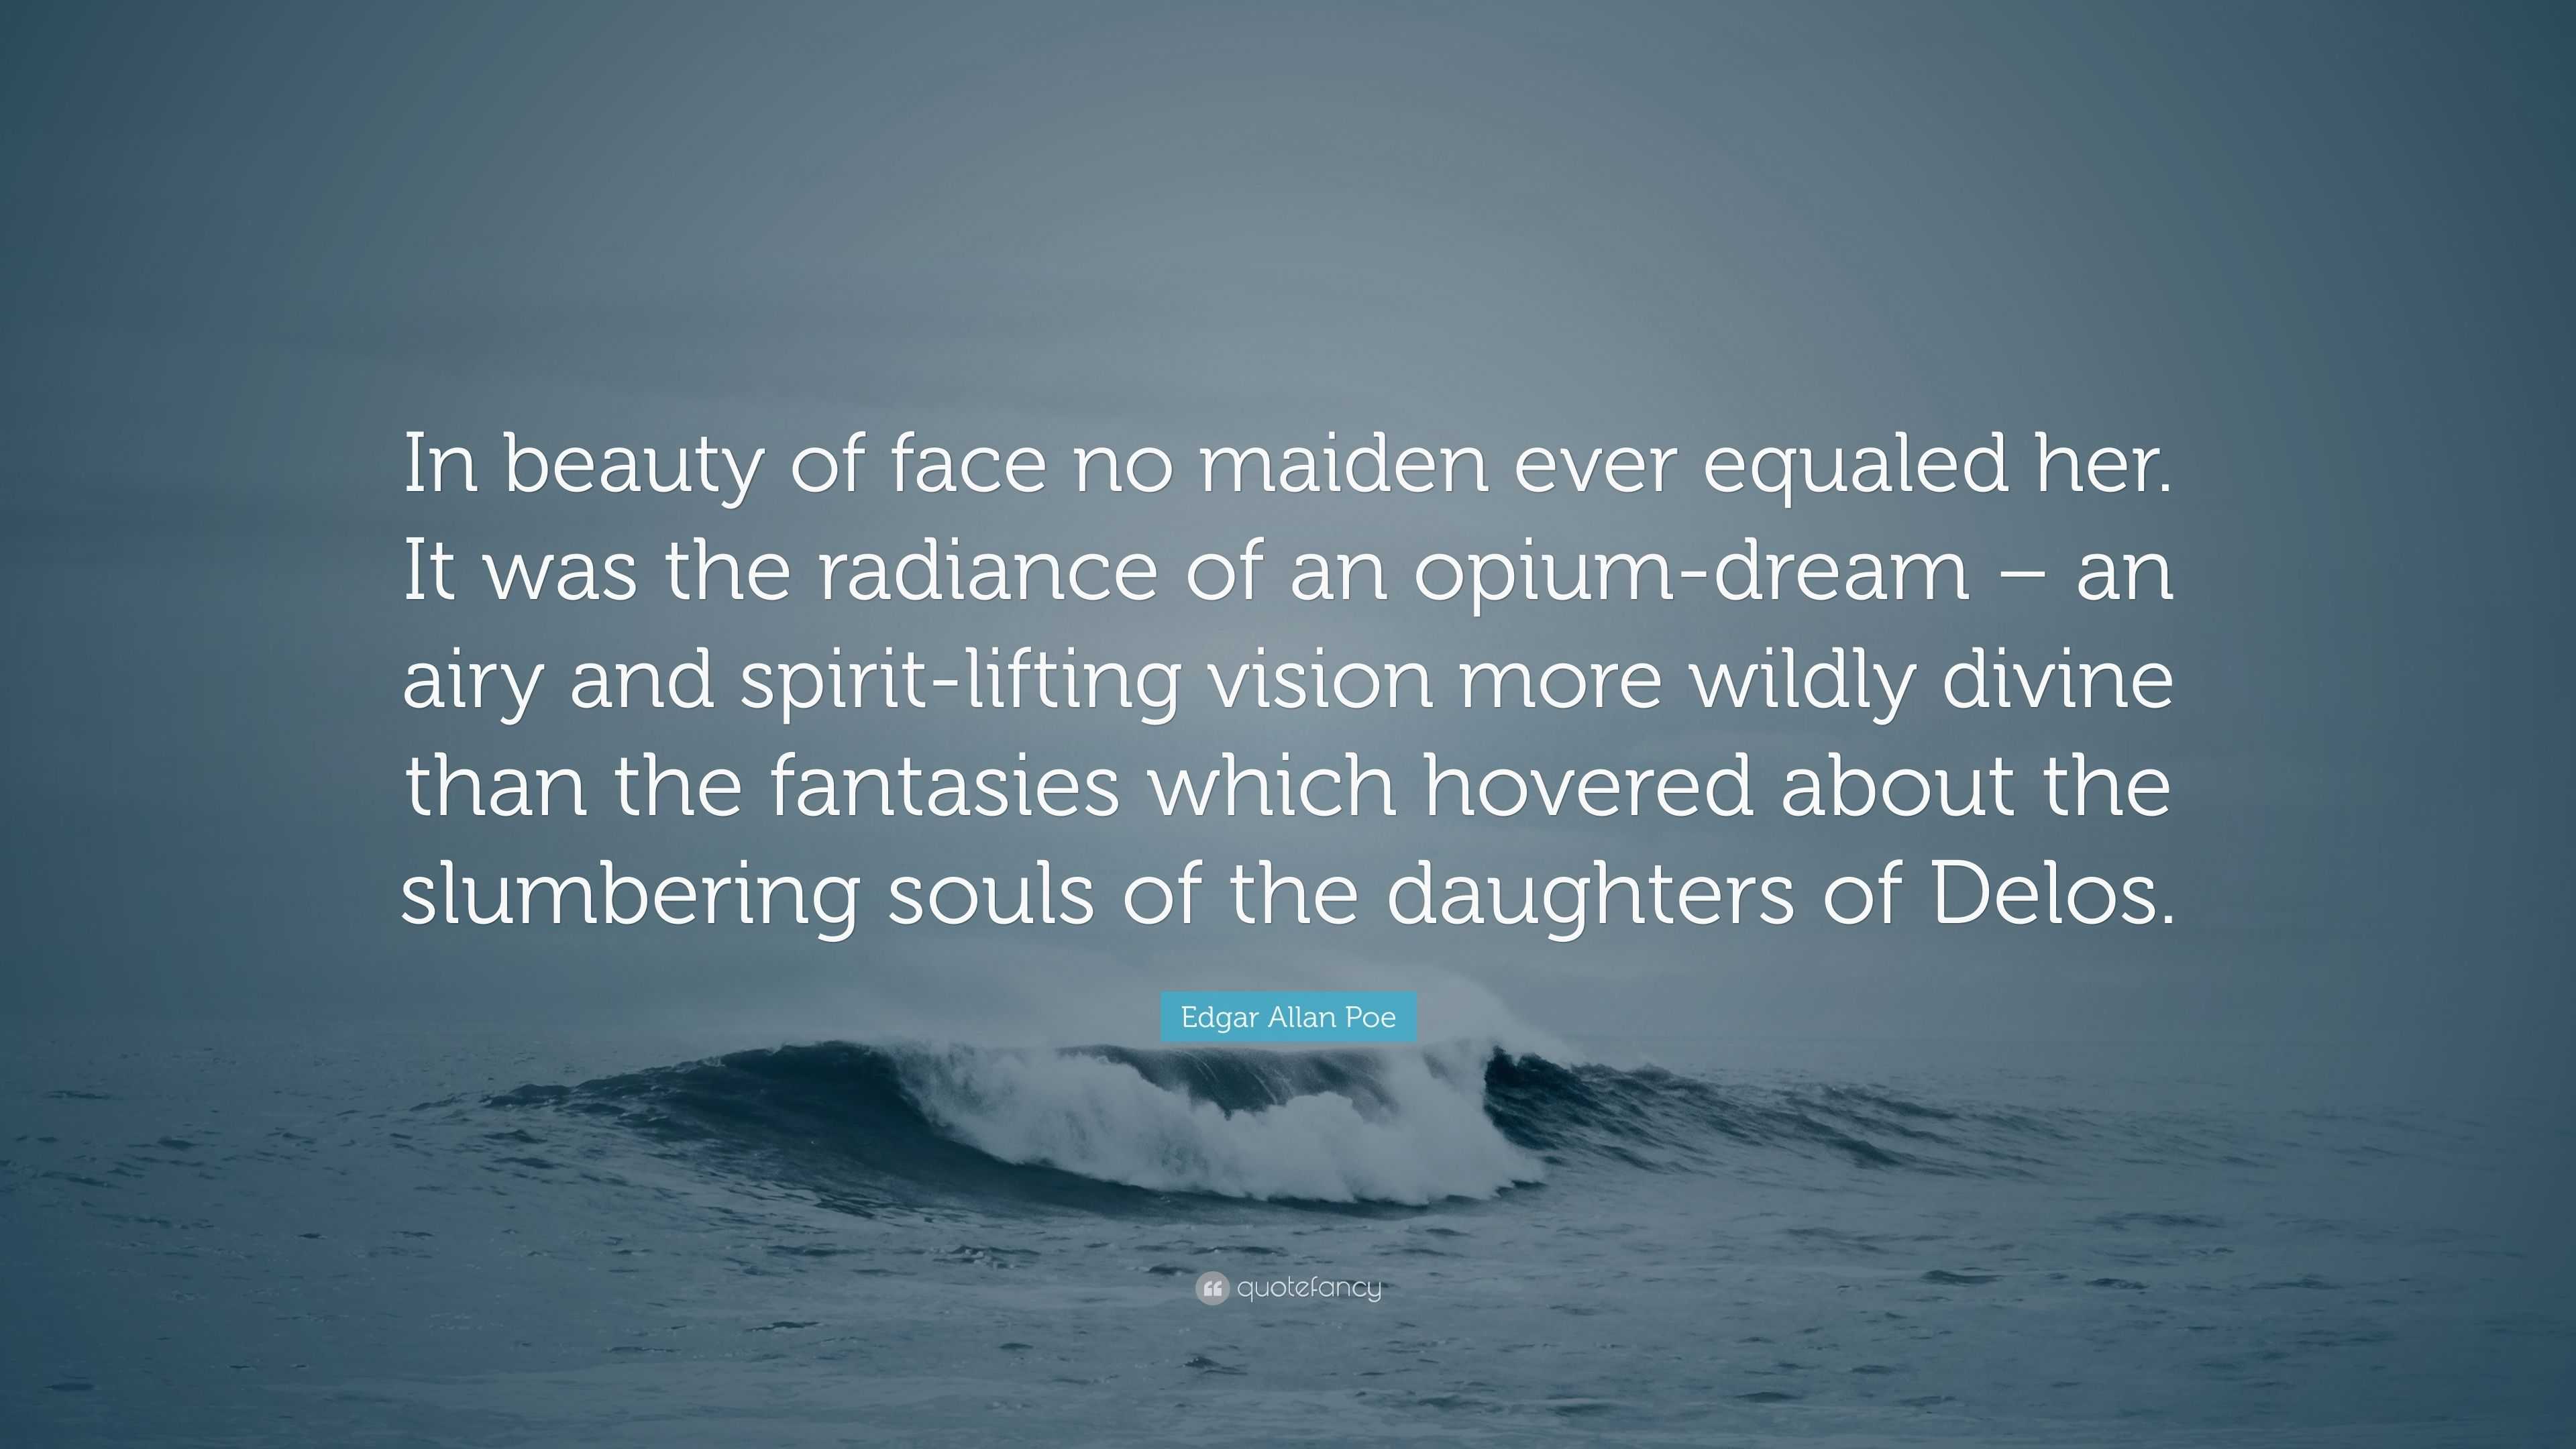 Edgar Allan Poe Quote: “In beauty of face no maiden ever equaled